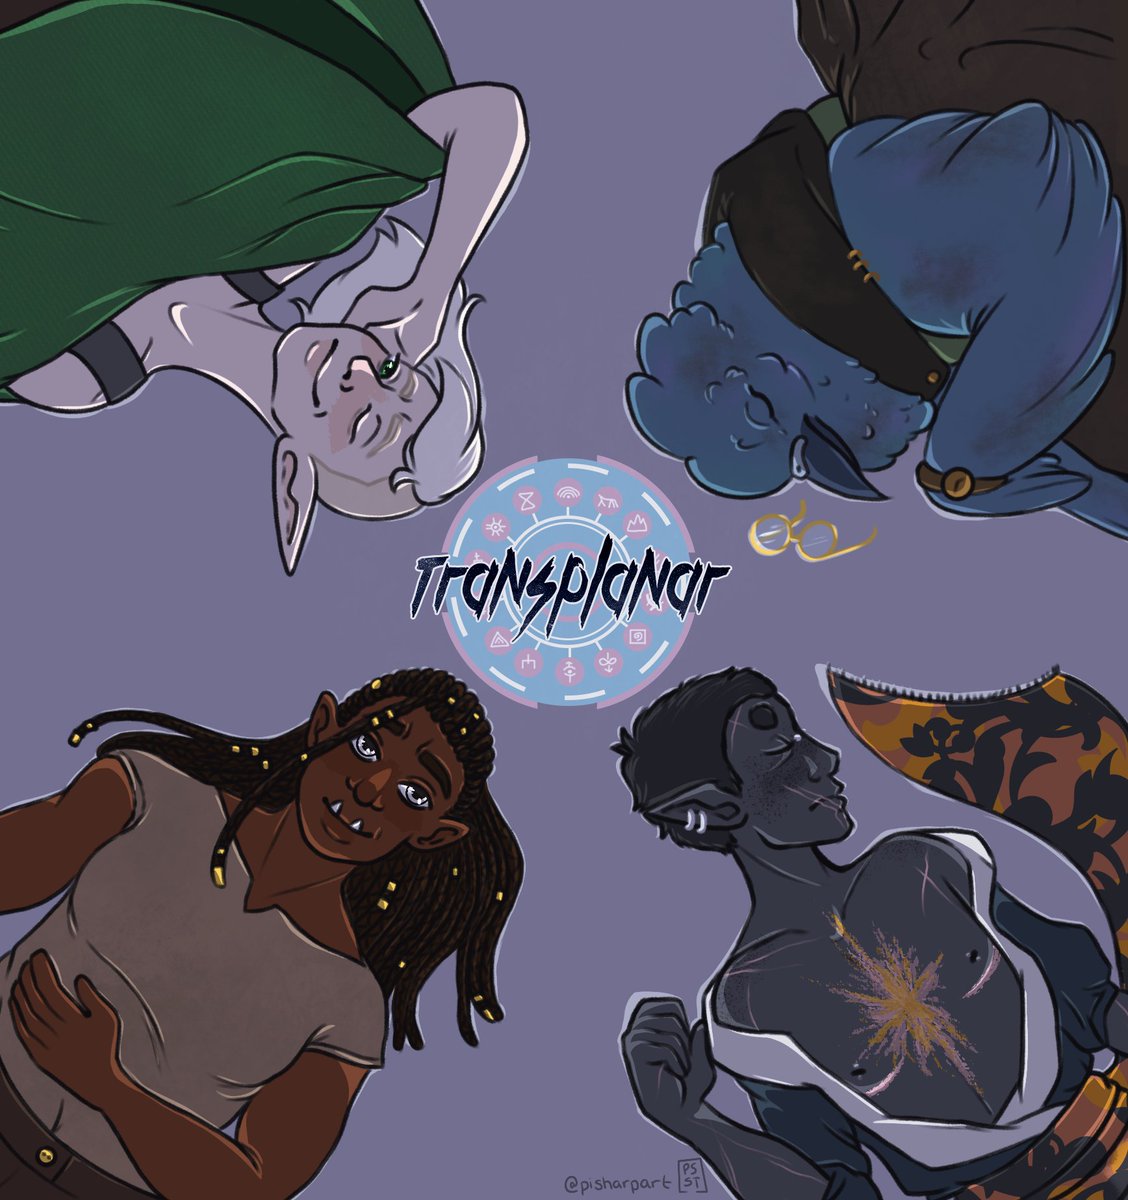 For  #FollowFriday, we're featuring 8 BIMPOC, trans, and/or queer-led  #DND/ #TTRPG projects: one for each of the 8 gods of our ALL-TRANS, noncolonial world.Ep. 8 of our POC-led game streams TOMORROW, Sat 10/3 at 3pm CDT on  http://twitch.tv/transplanarrpg ! @pisharpart! Commissions